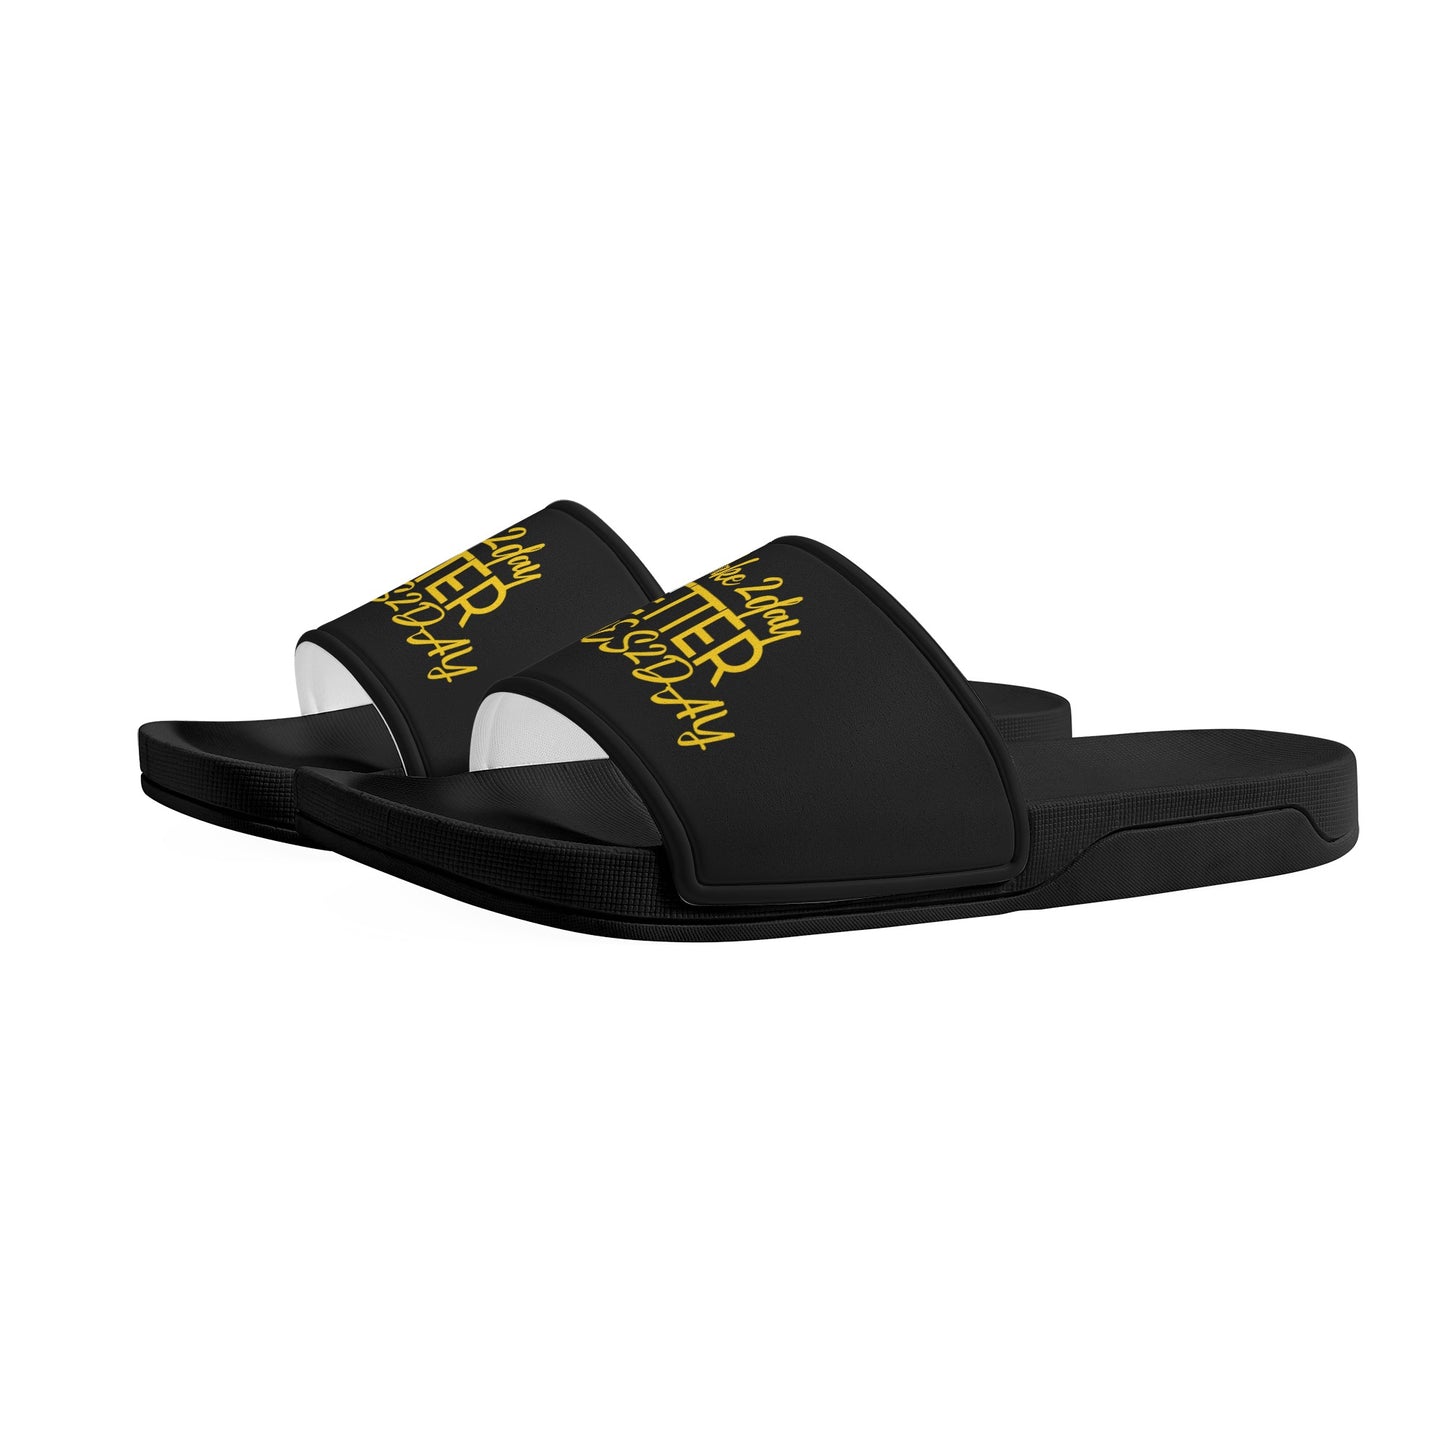 Men's Make 2Day Better Then YES2DAY Slide Sandals Shoes